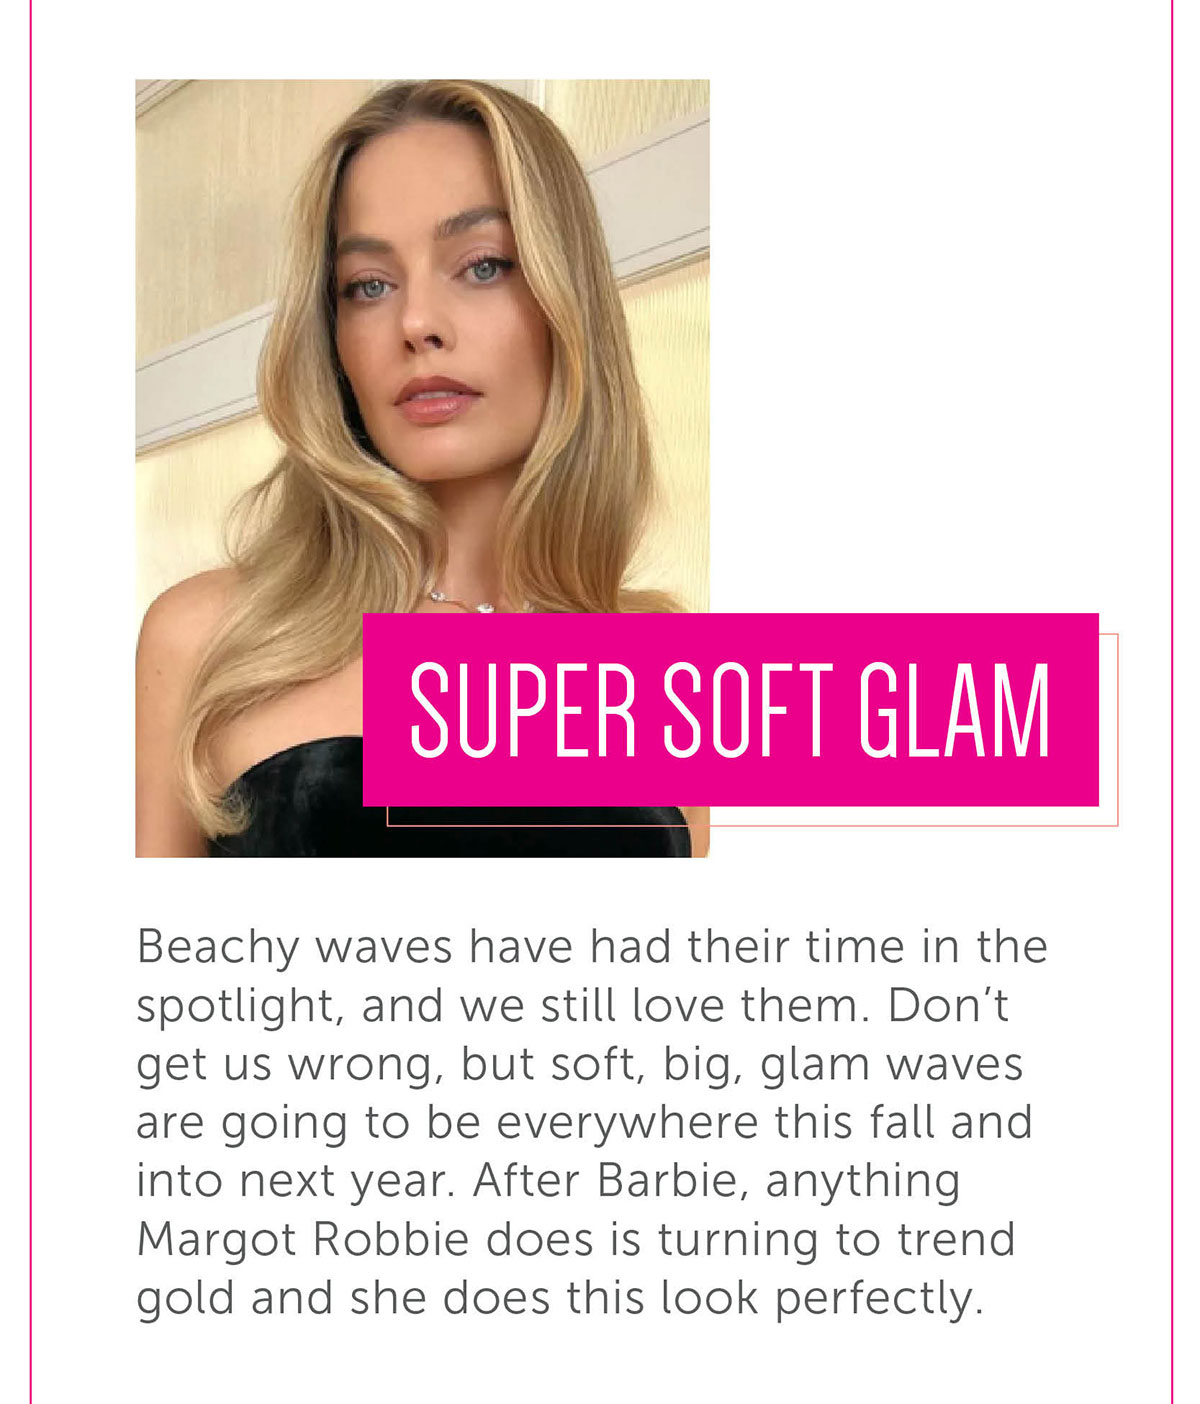 Super Soft Glam Beachy waves have had their time in the spotlight, and we still love them. Don’t get us wrong, but soft, big, glam waves are going to be everywhere this fall and into next year. After Barbie, anything Margot Robbie does is turning to trend gold and she does this look perfectly.